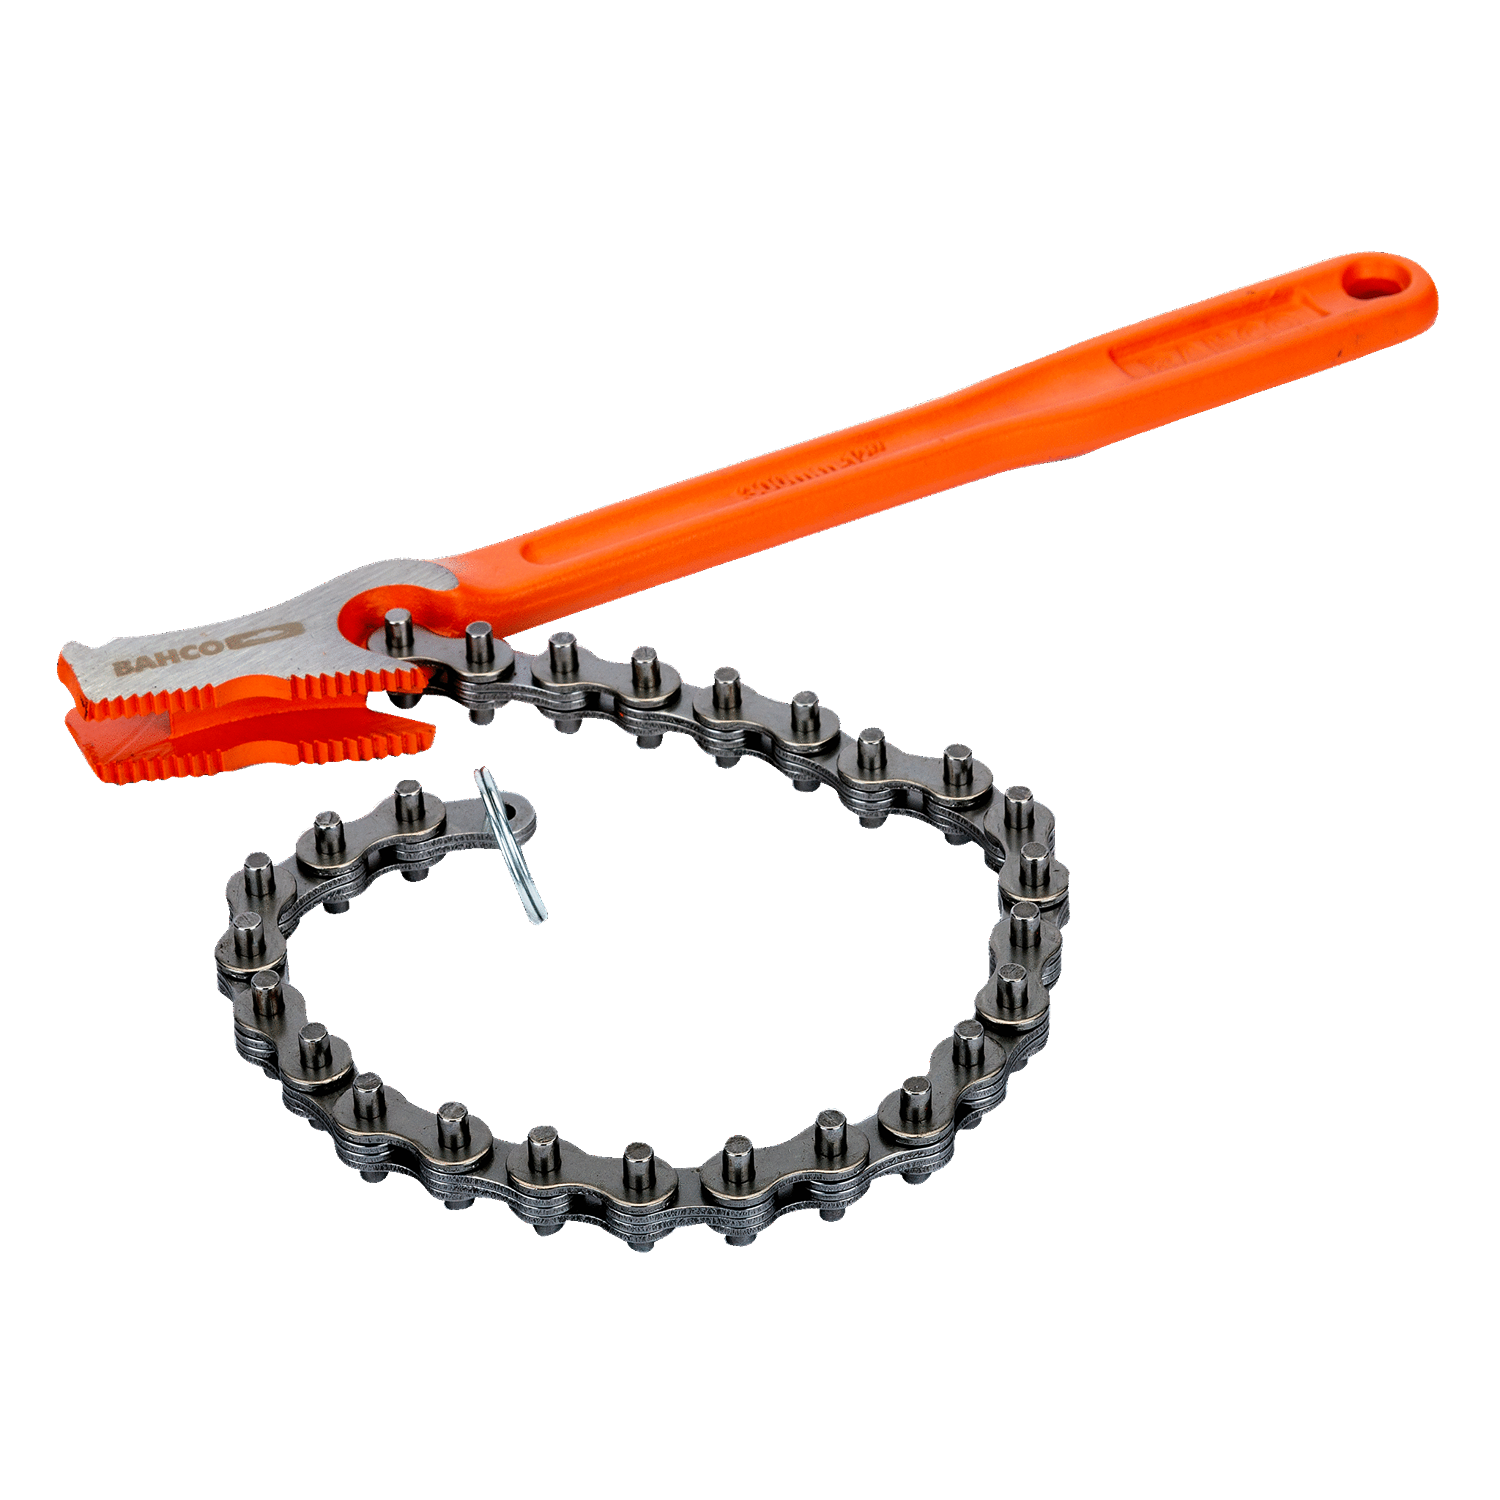 BAHCO 370 Chain Pipe Wrench with Steel Handle (BAHCO Tools) - Premium Chain Pipe Wrench from BAHCO - Shop now at Yew Aik.